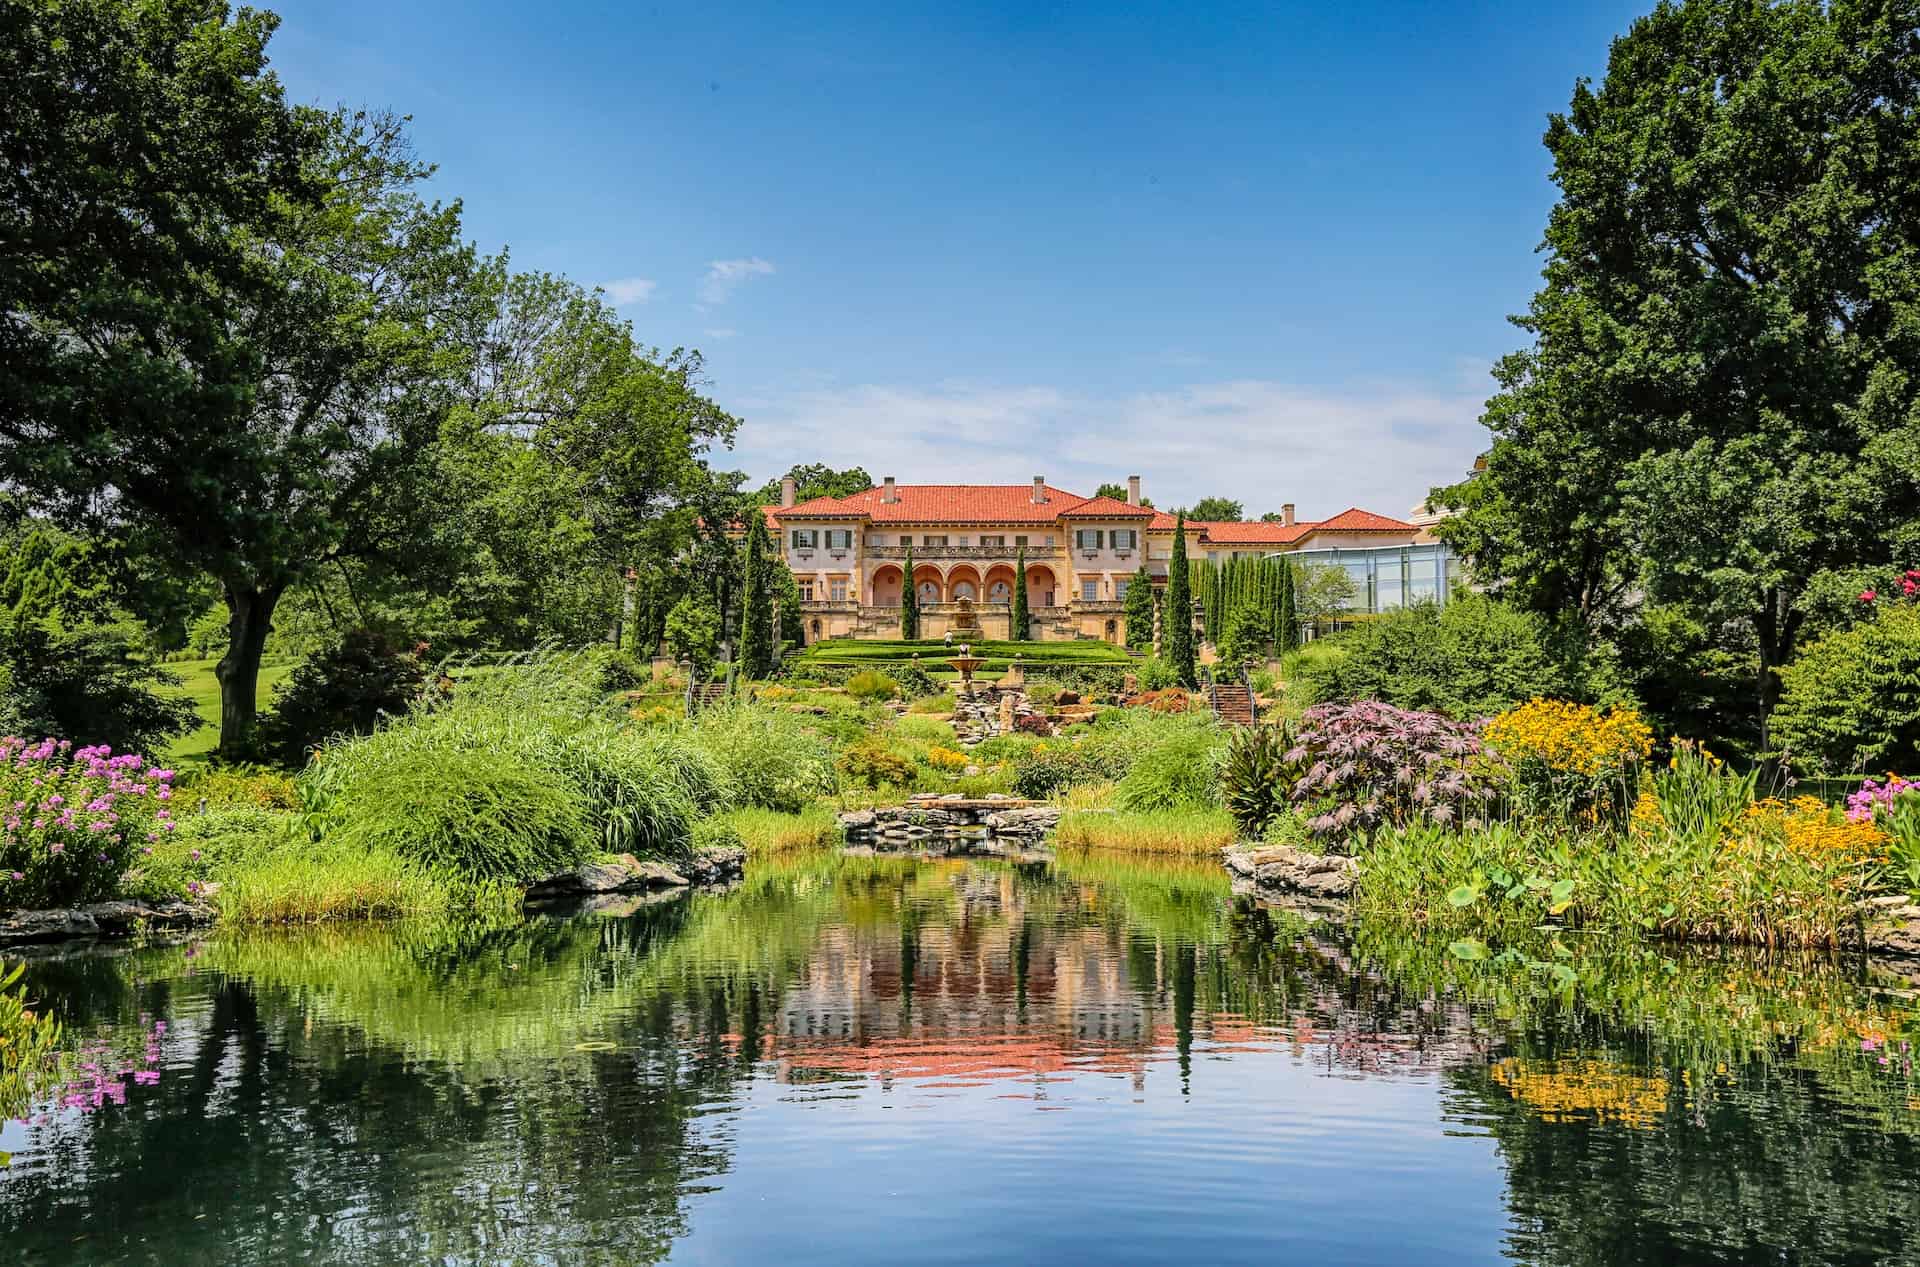 Best things to do in Tulsa Oklahoma - Kevin Matthews II - Philbrook Museum of Art with lake by Mick Haupt on Unsplash